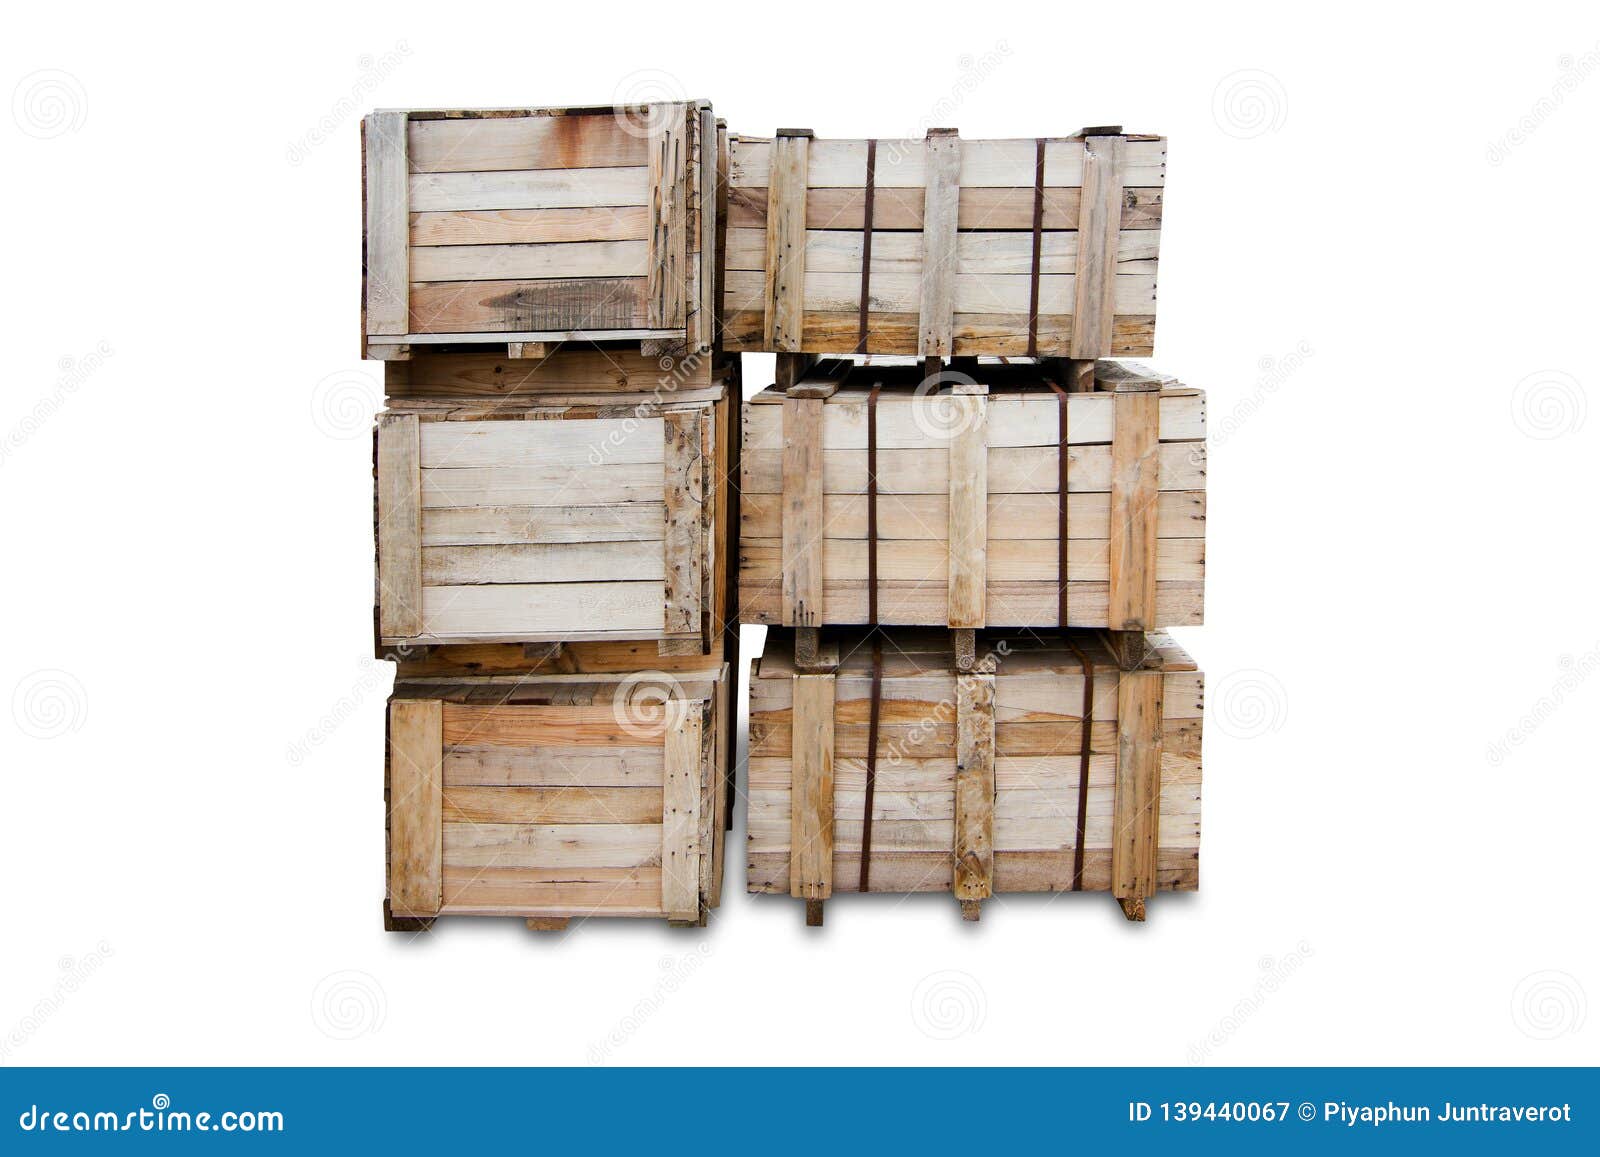 wood pallets - crates for transportation and fracture protection